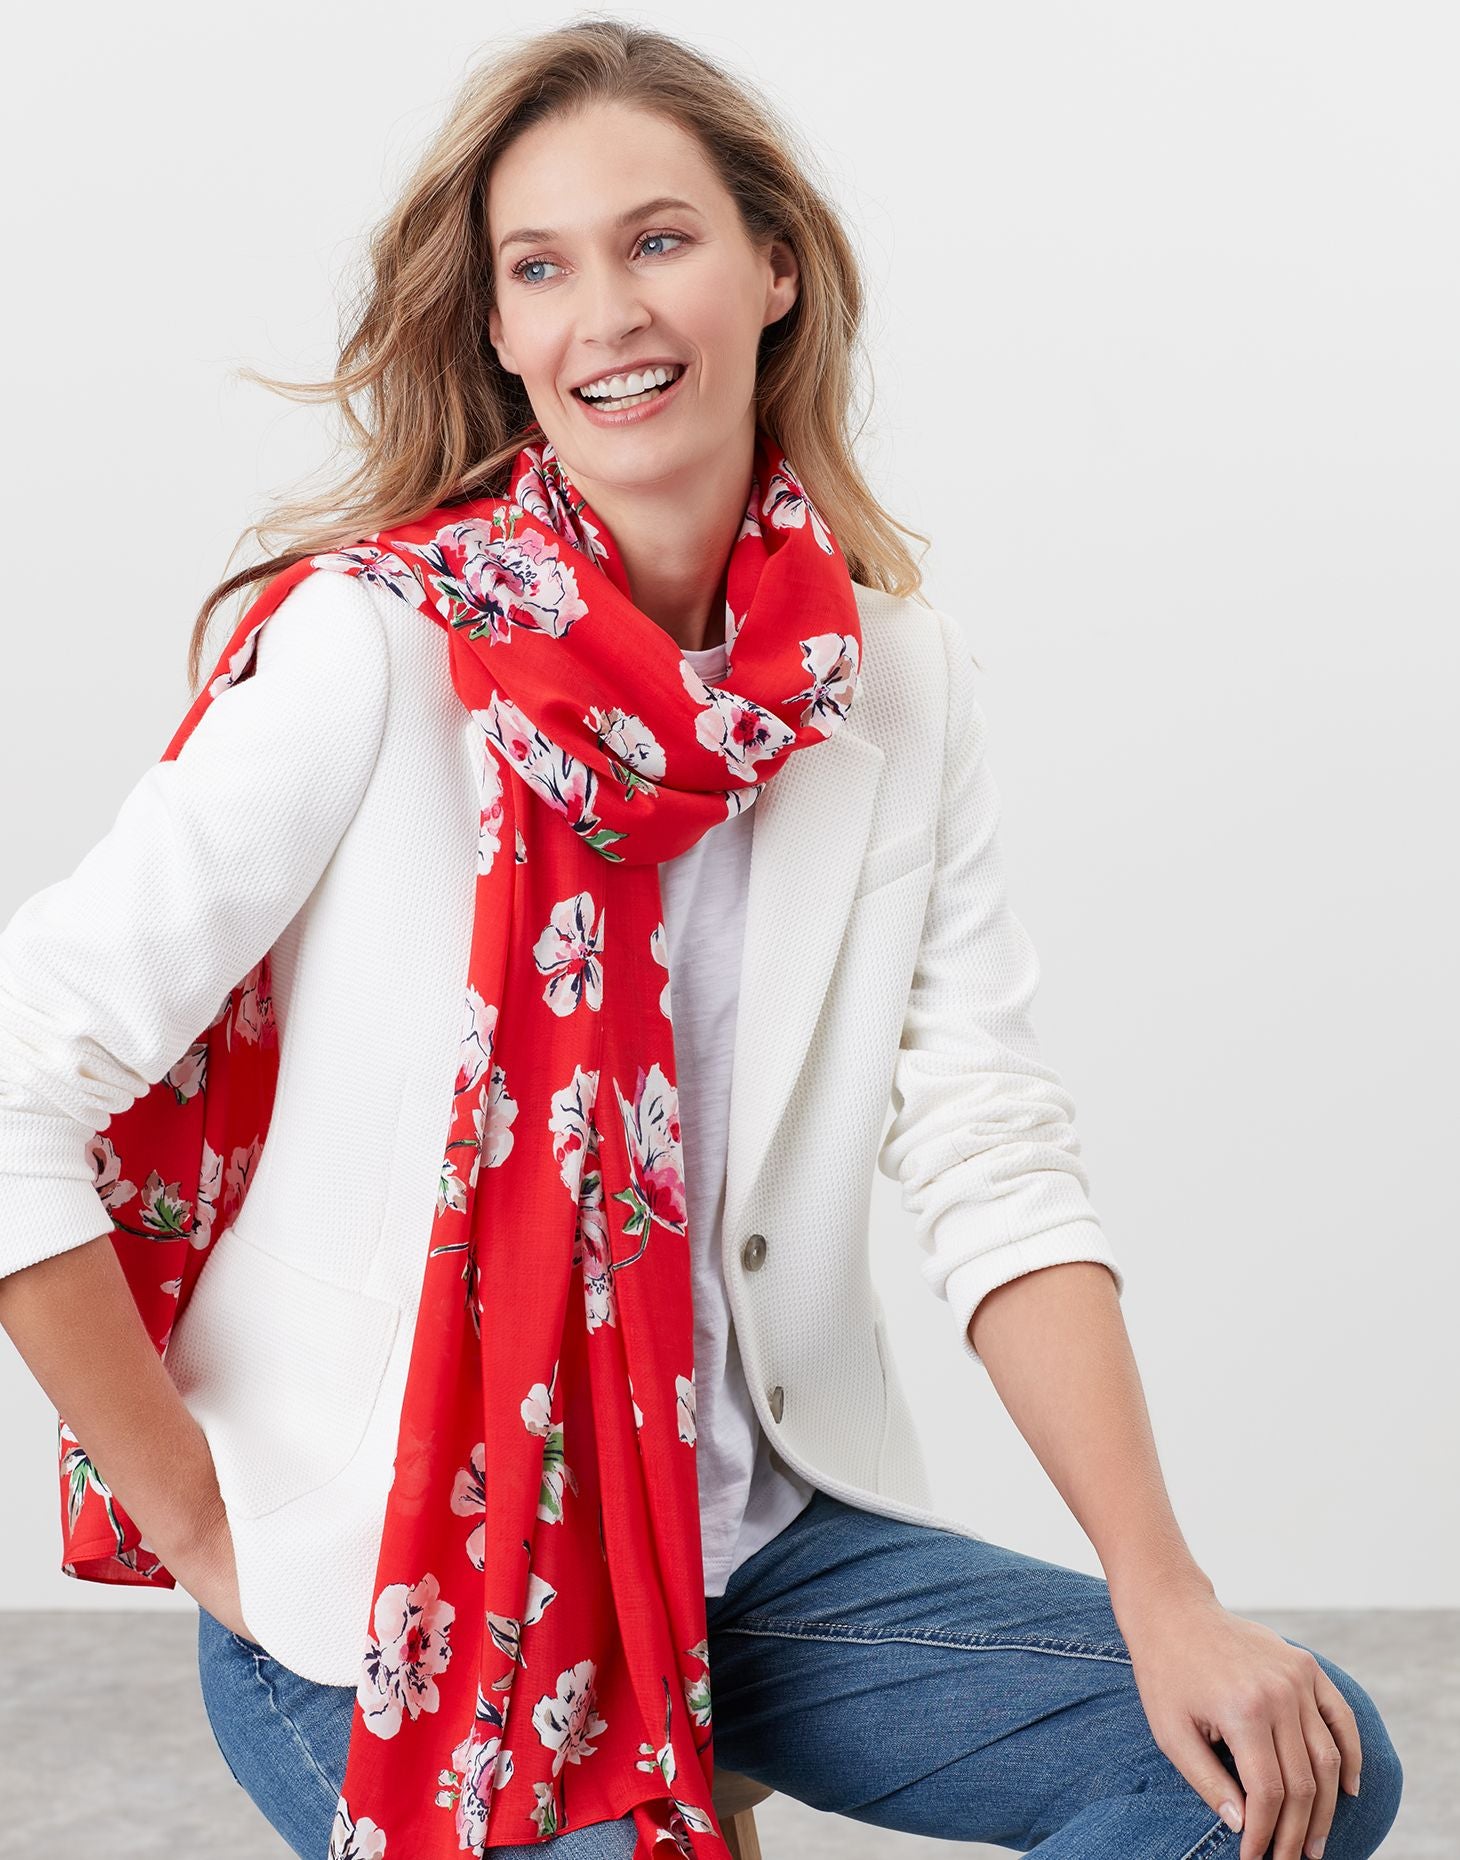 Conway Printed Scarf In Red Floral